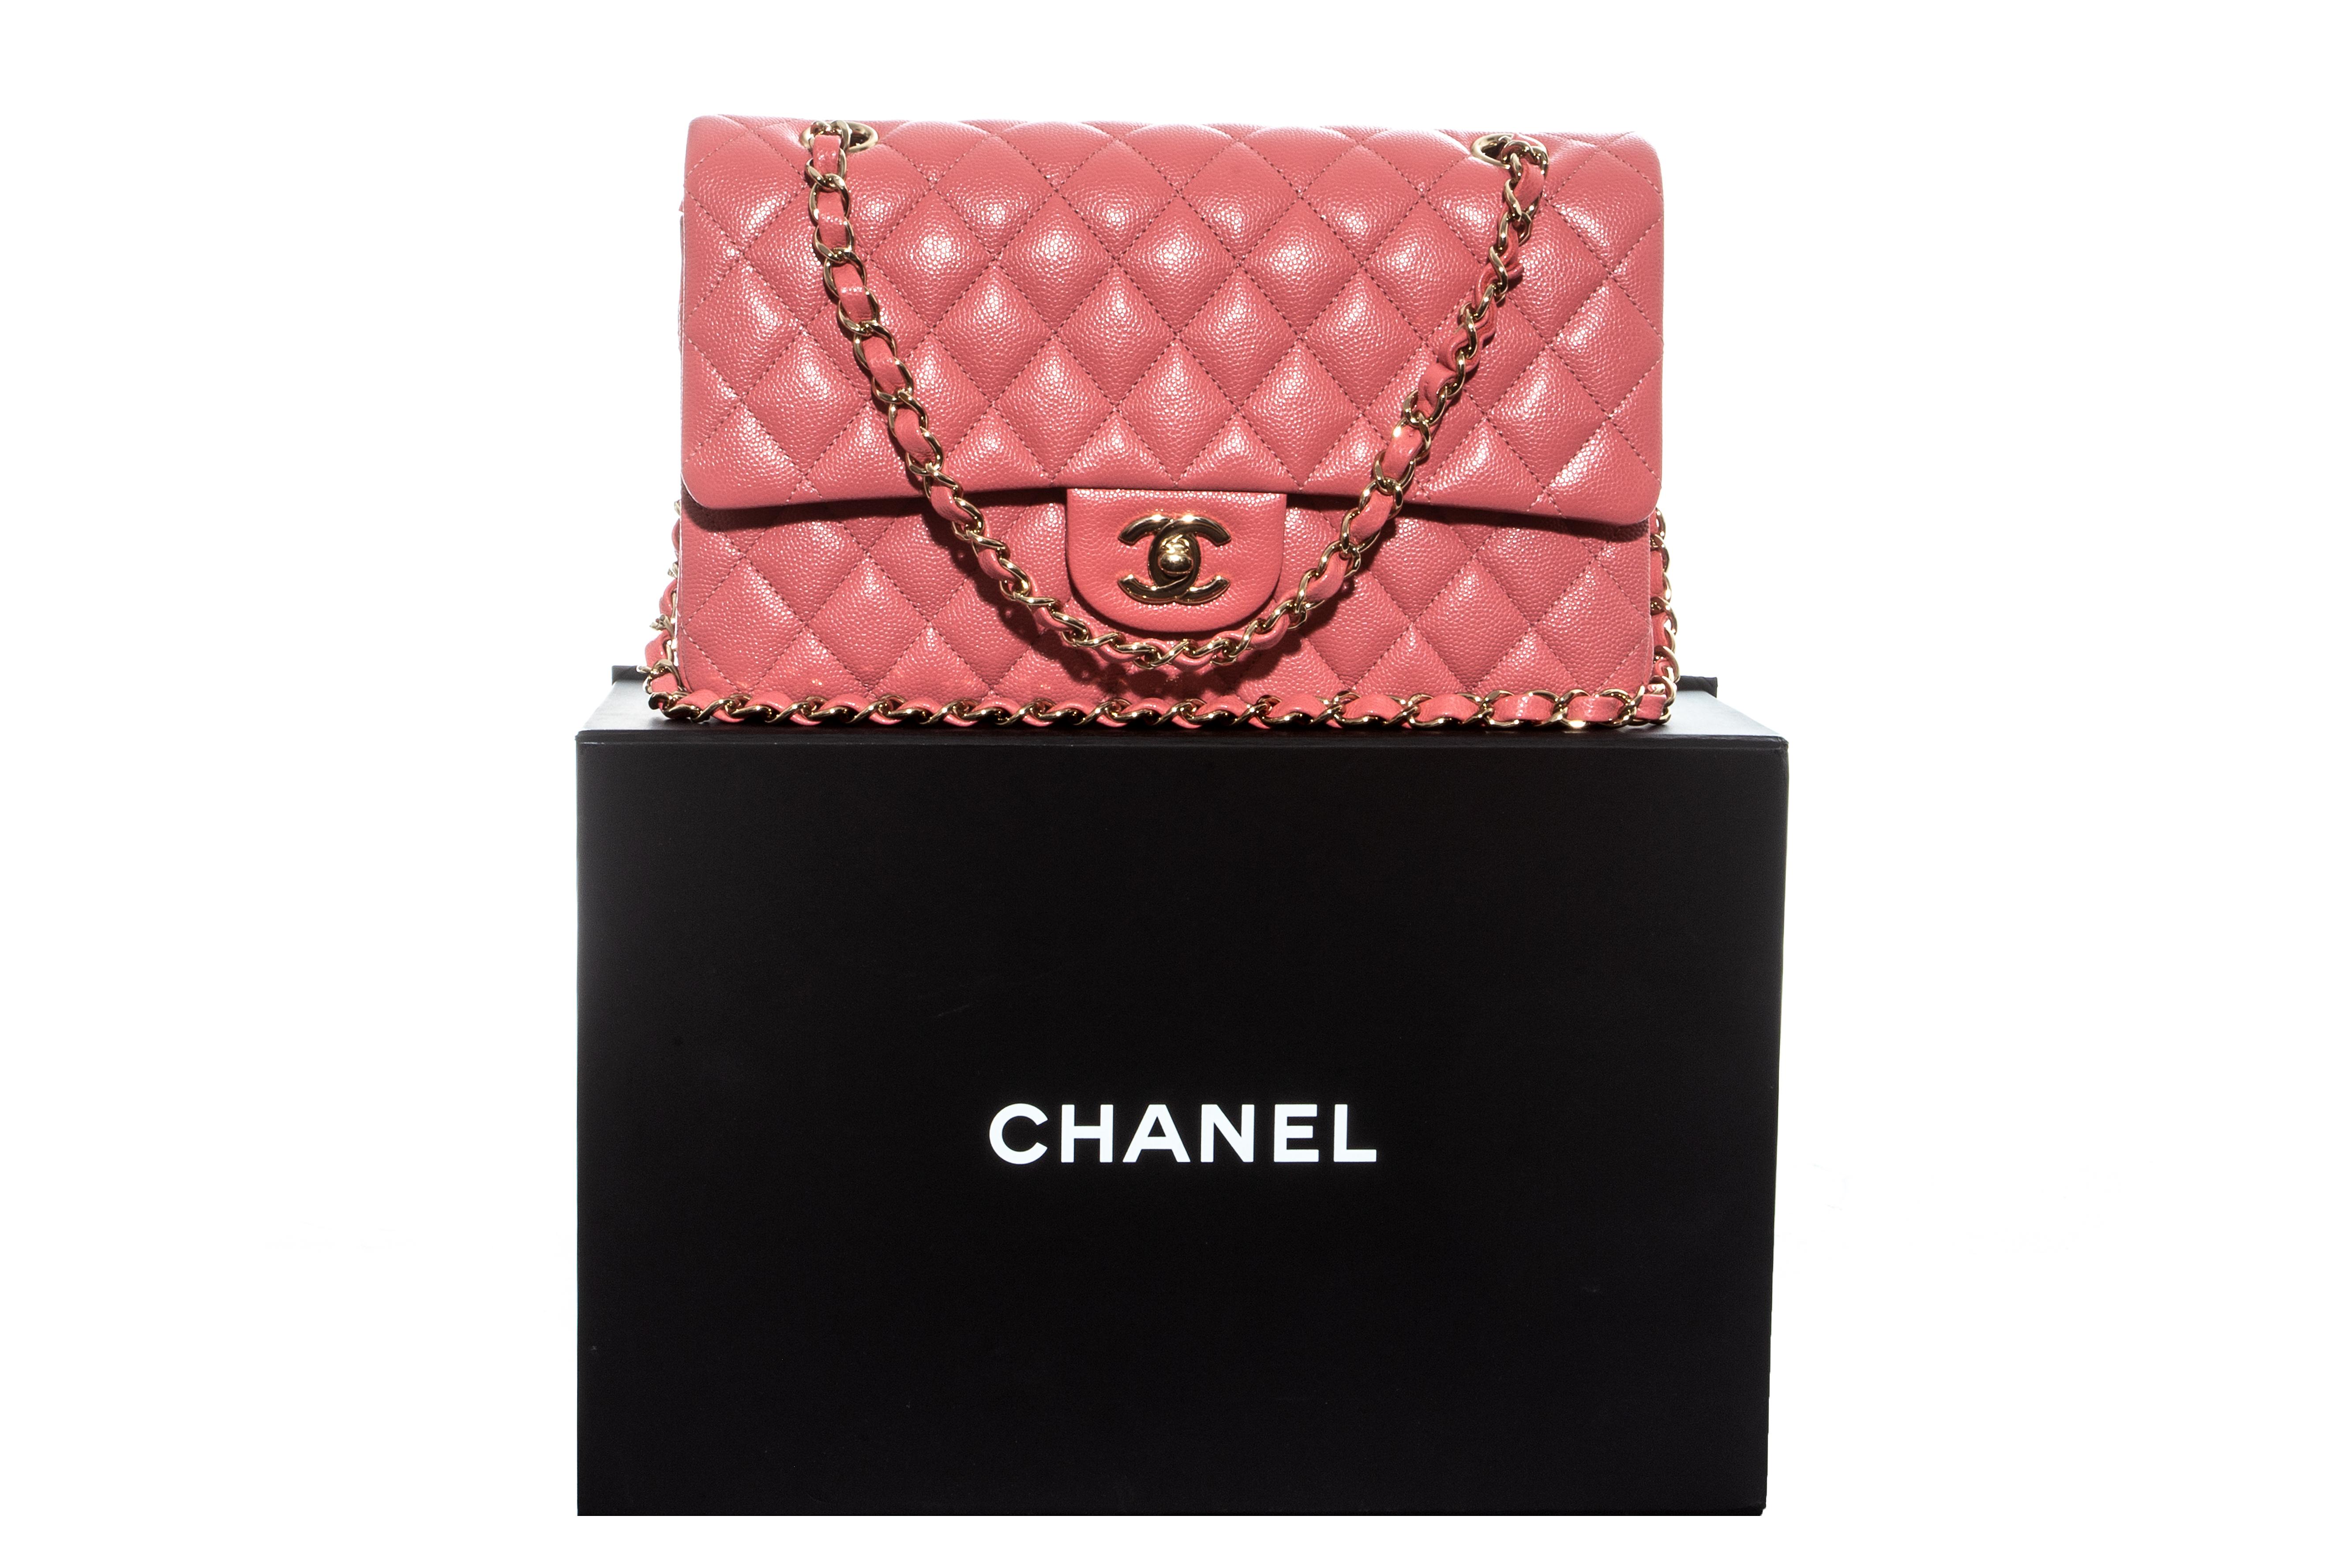 Chanel pink caviar leather classic 2.55 flap bag with gold hardware and adjustable chain. Signature Chanel diamond quilts, 'CC' turn clasp and fabric interior. Sold with original packaging.

Excellent condition